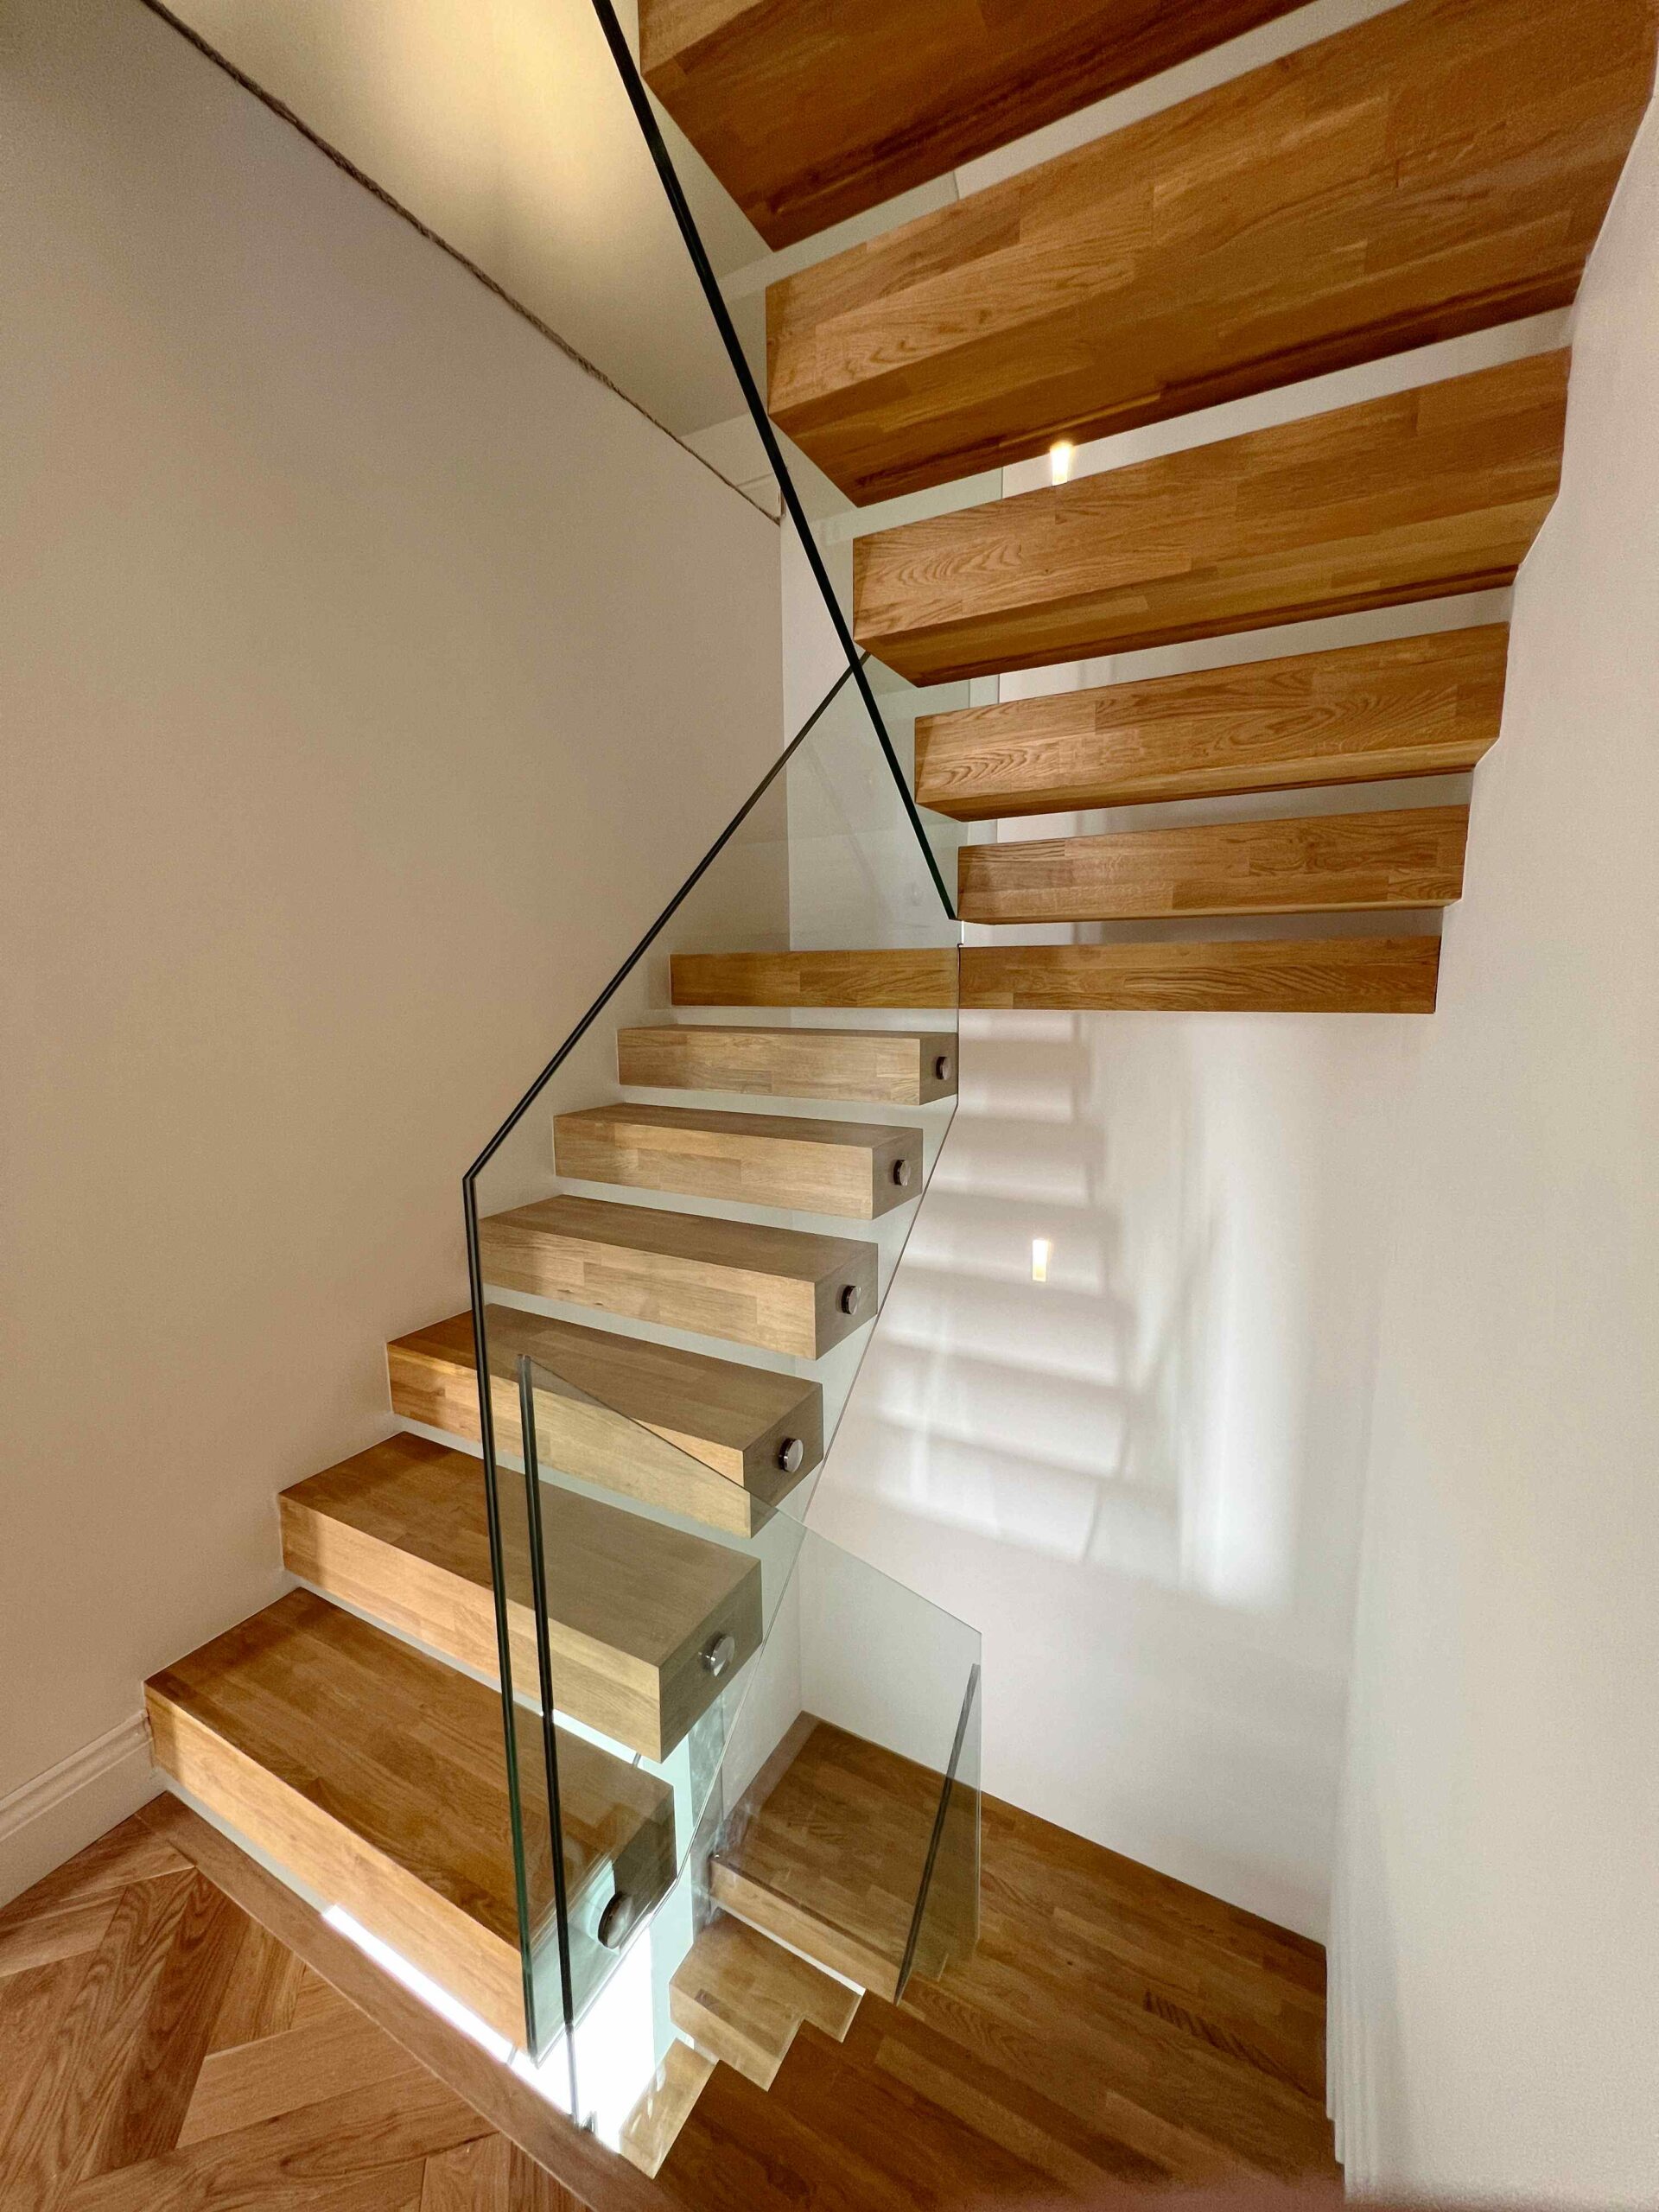 Floating staircase with glass balustrades